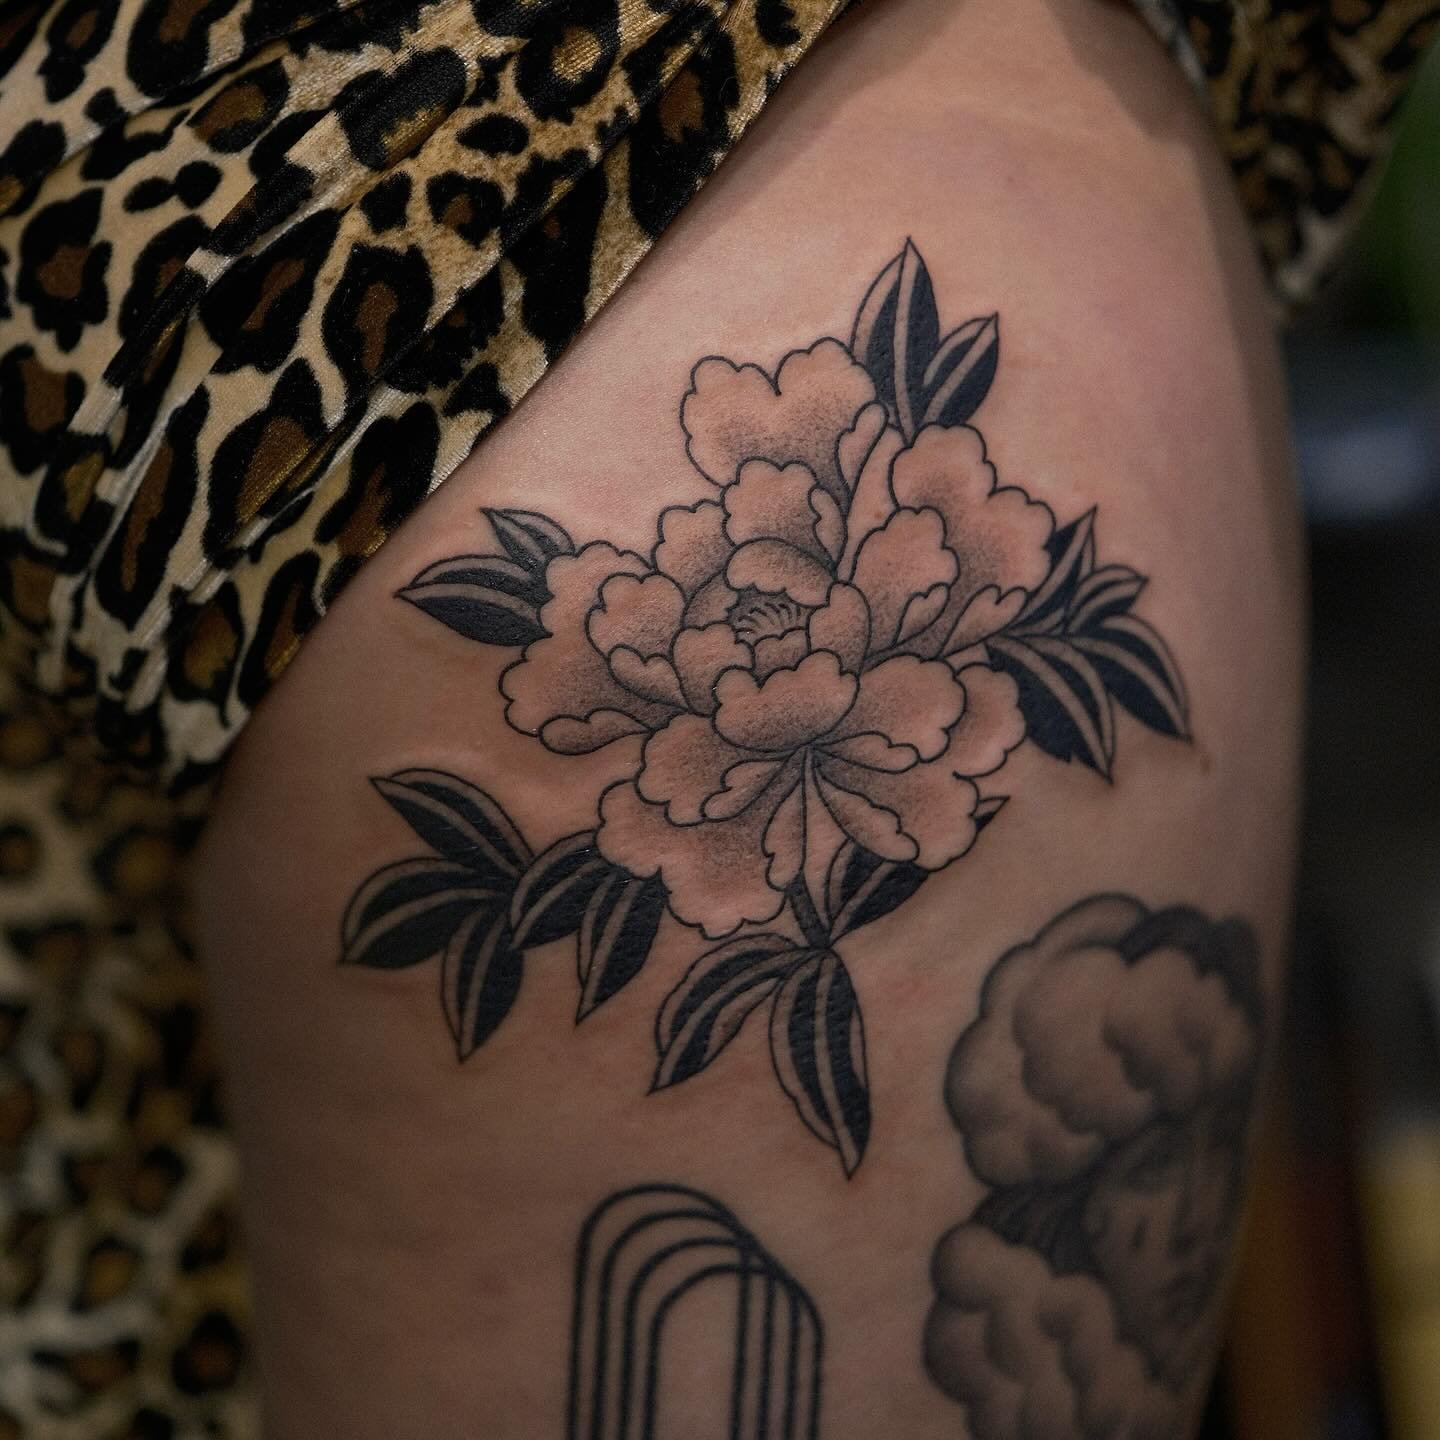 Always keen to tattoo peonies! Second slide has a small cover up 😊 Which kind of shading do you guys prefer? 
Booking link in bio ☺️
@chapeltattoo